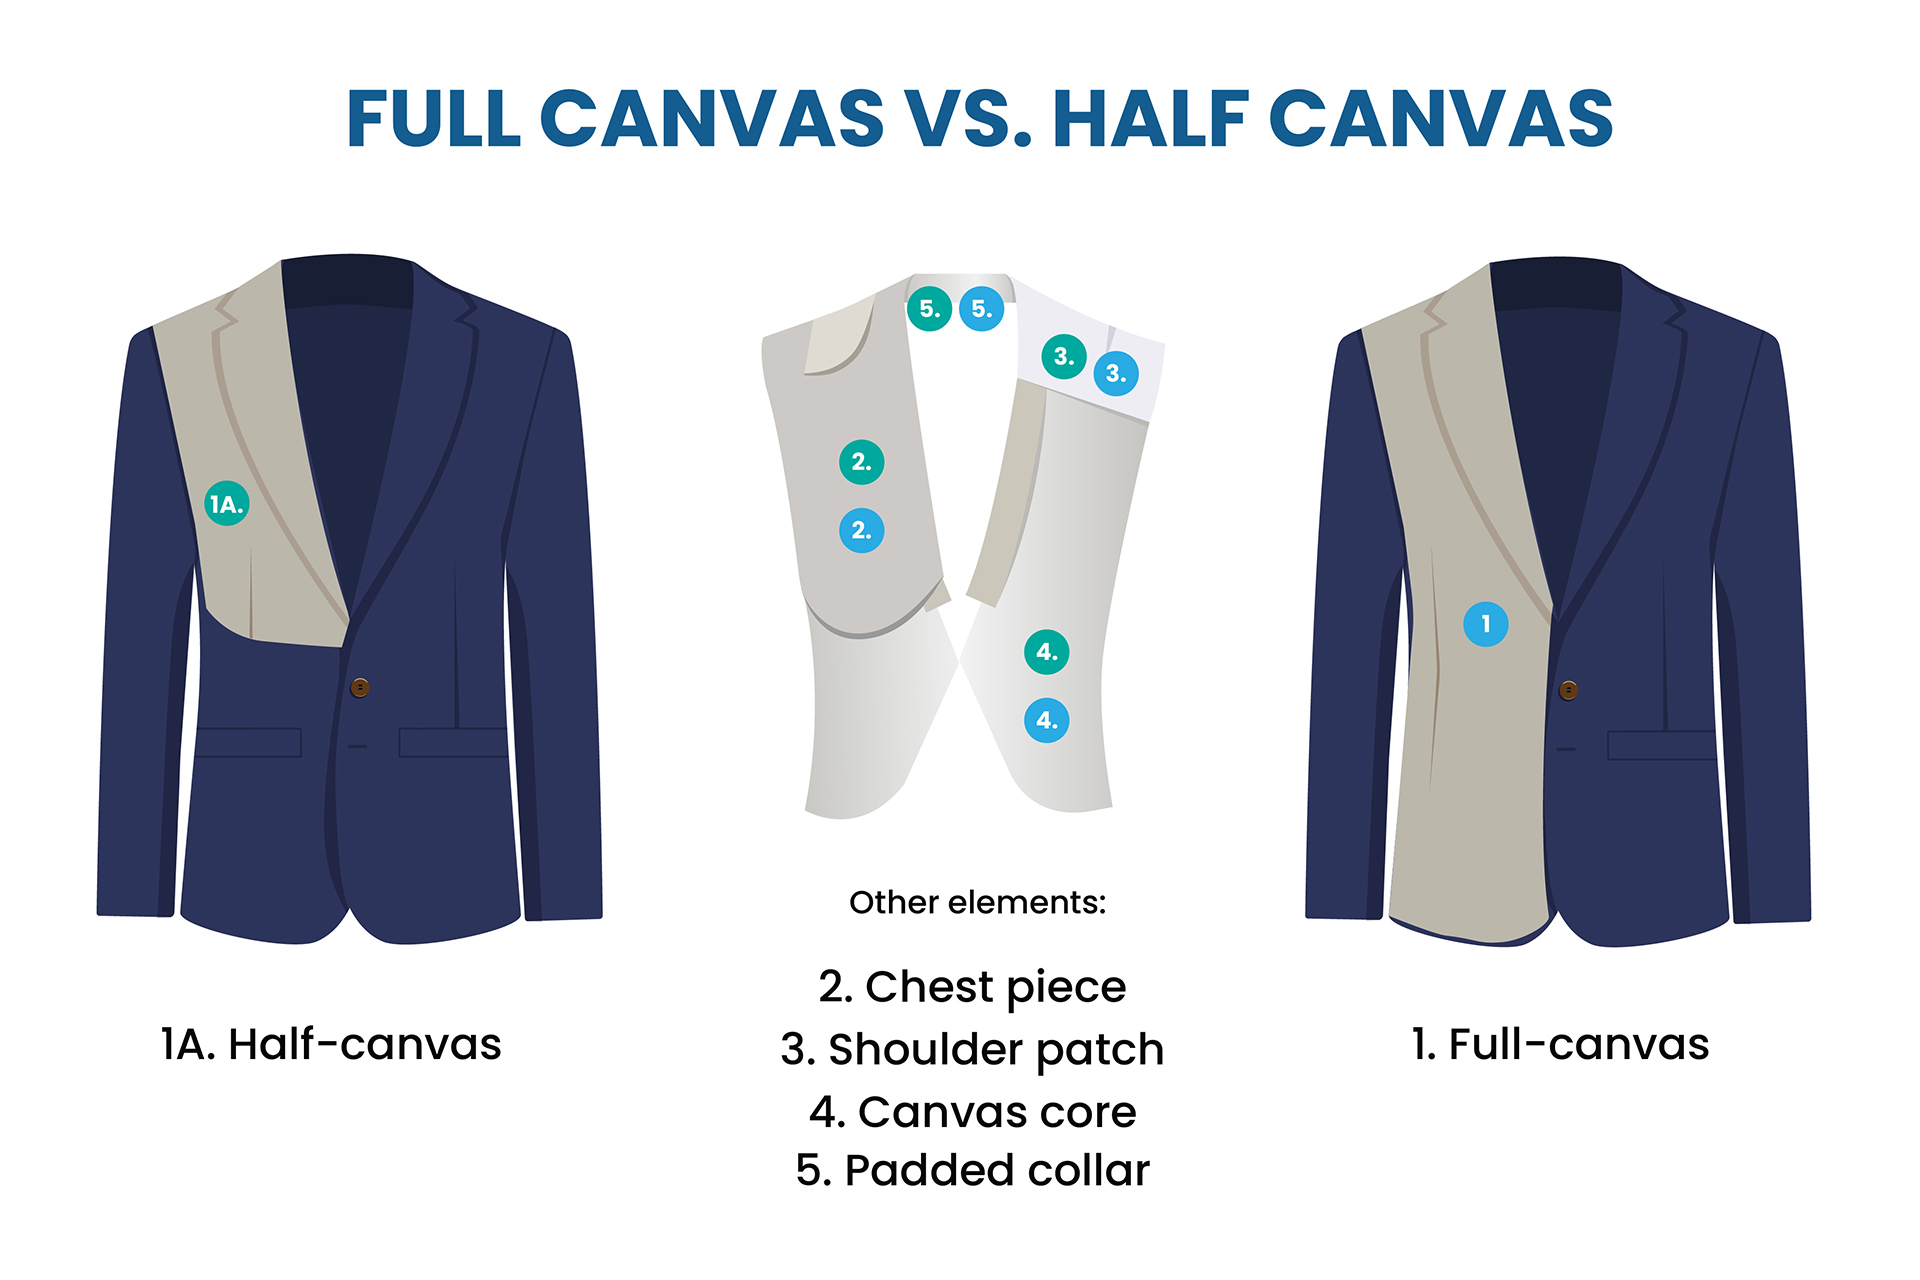 half-canvas vs. full-canvas suit jacket anatomy and difference